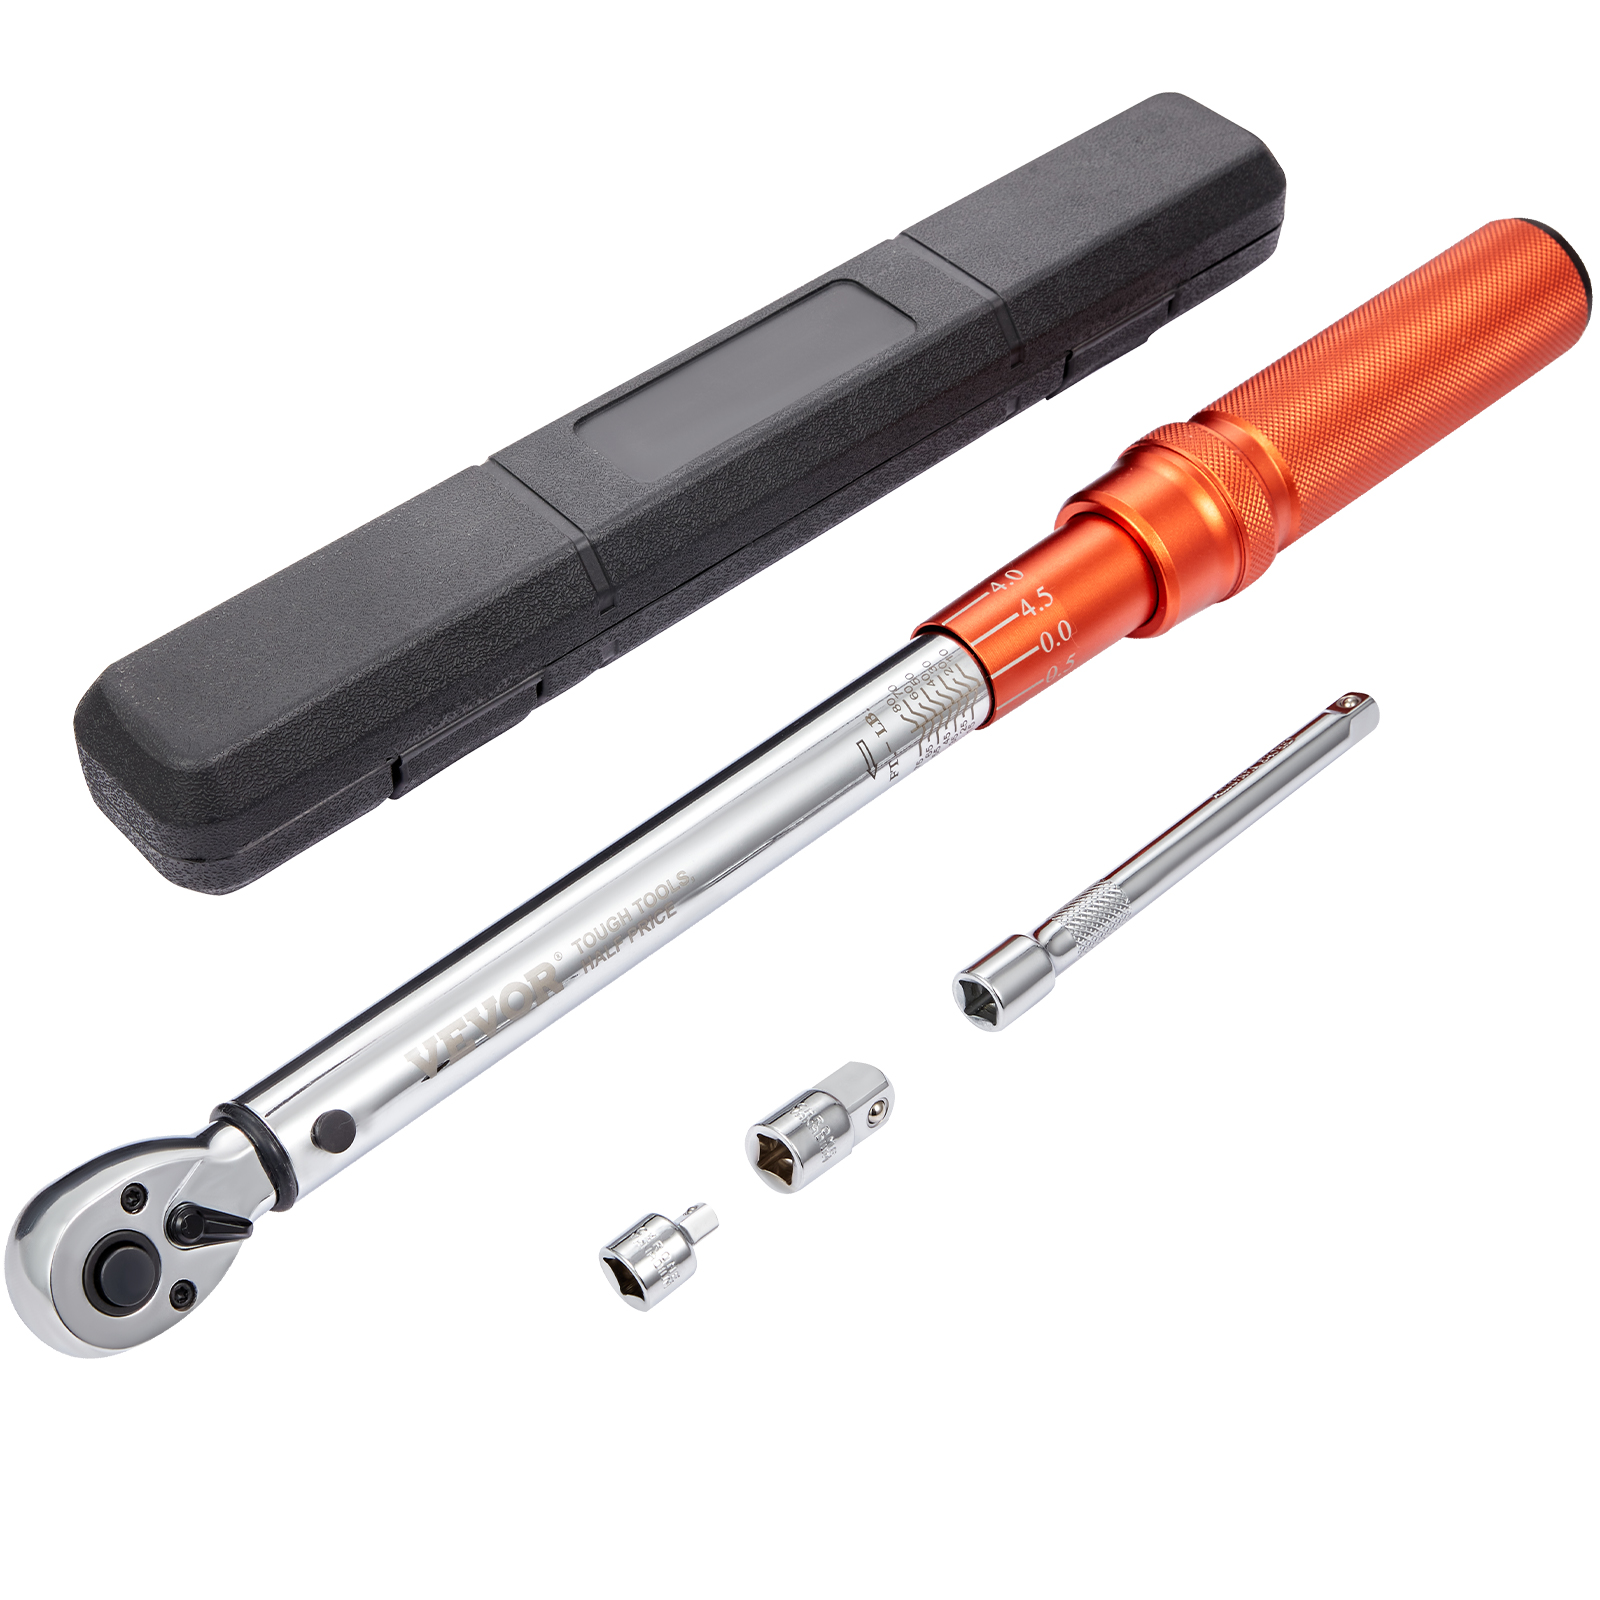 Torque Wrench,Torque Adapter,Extension Rod